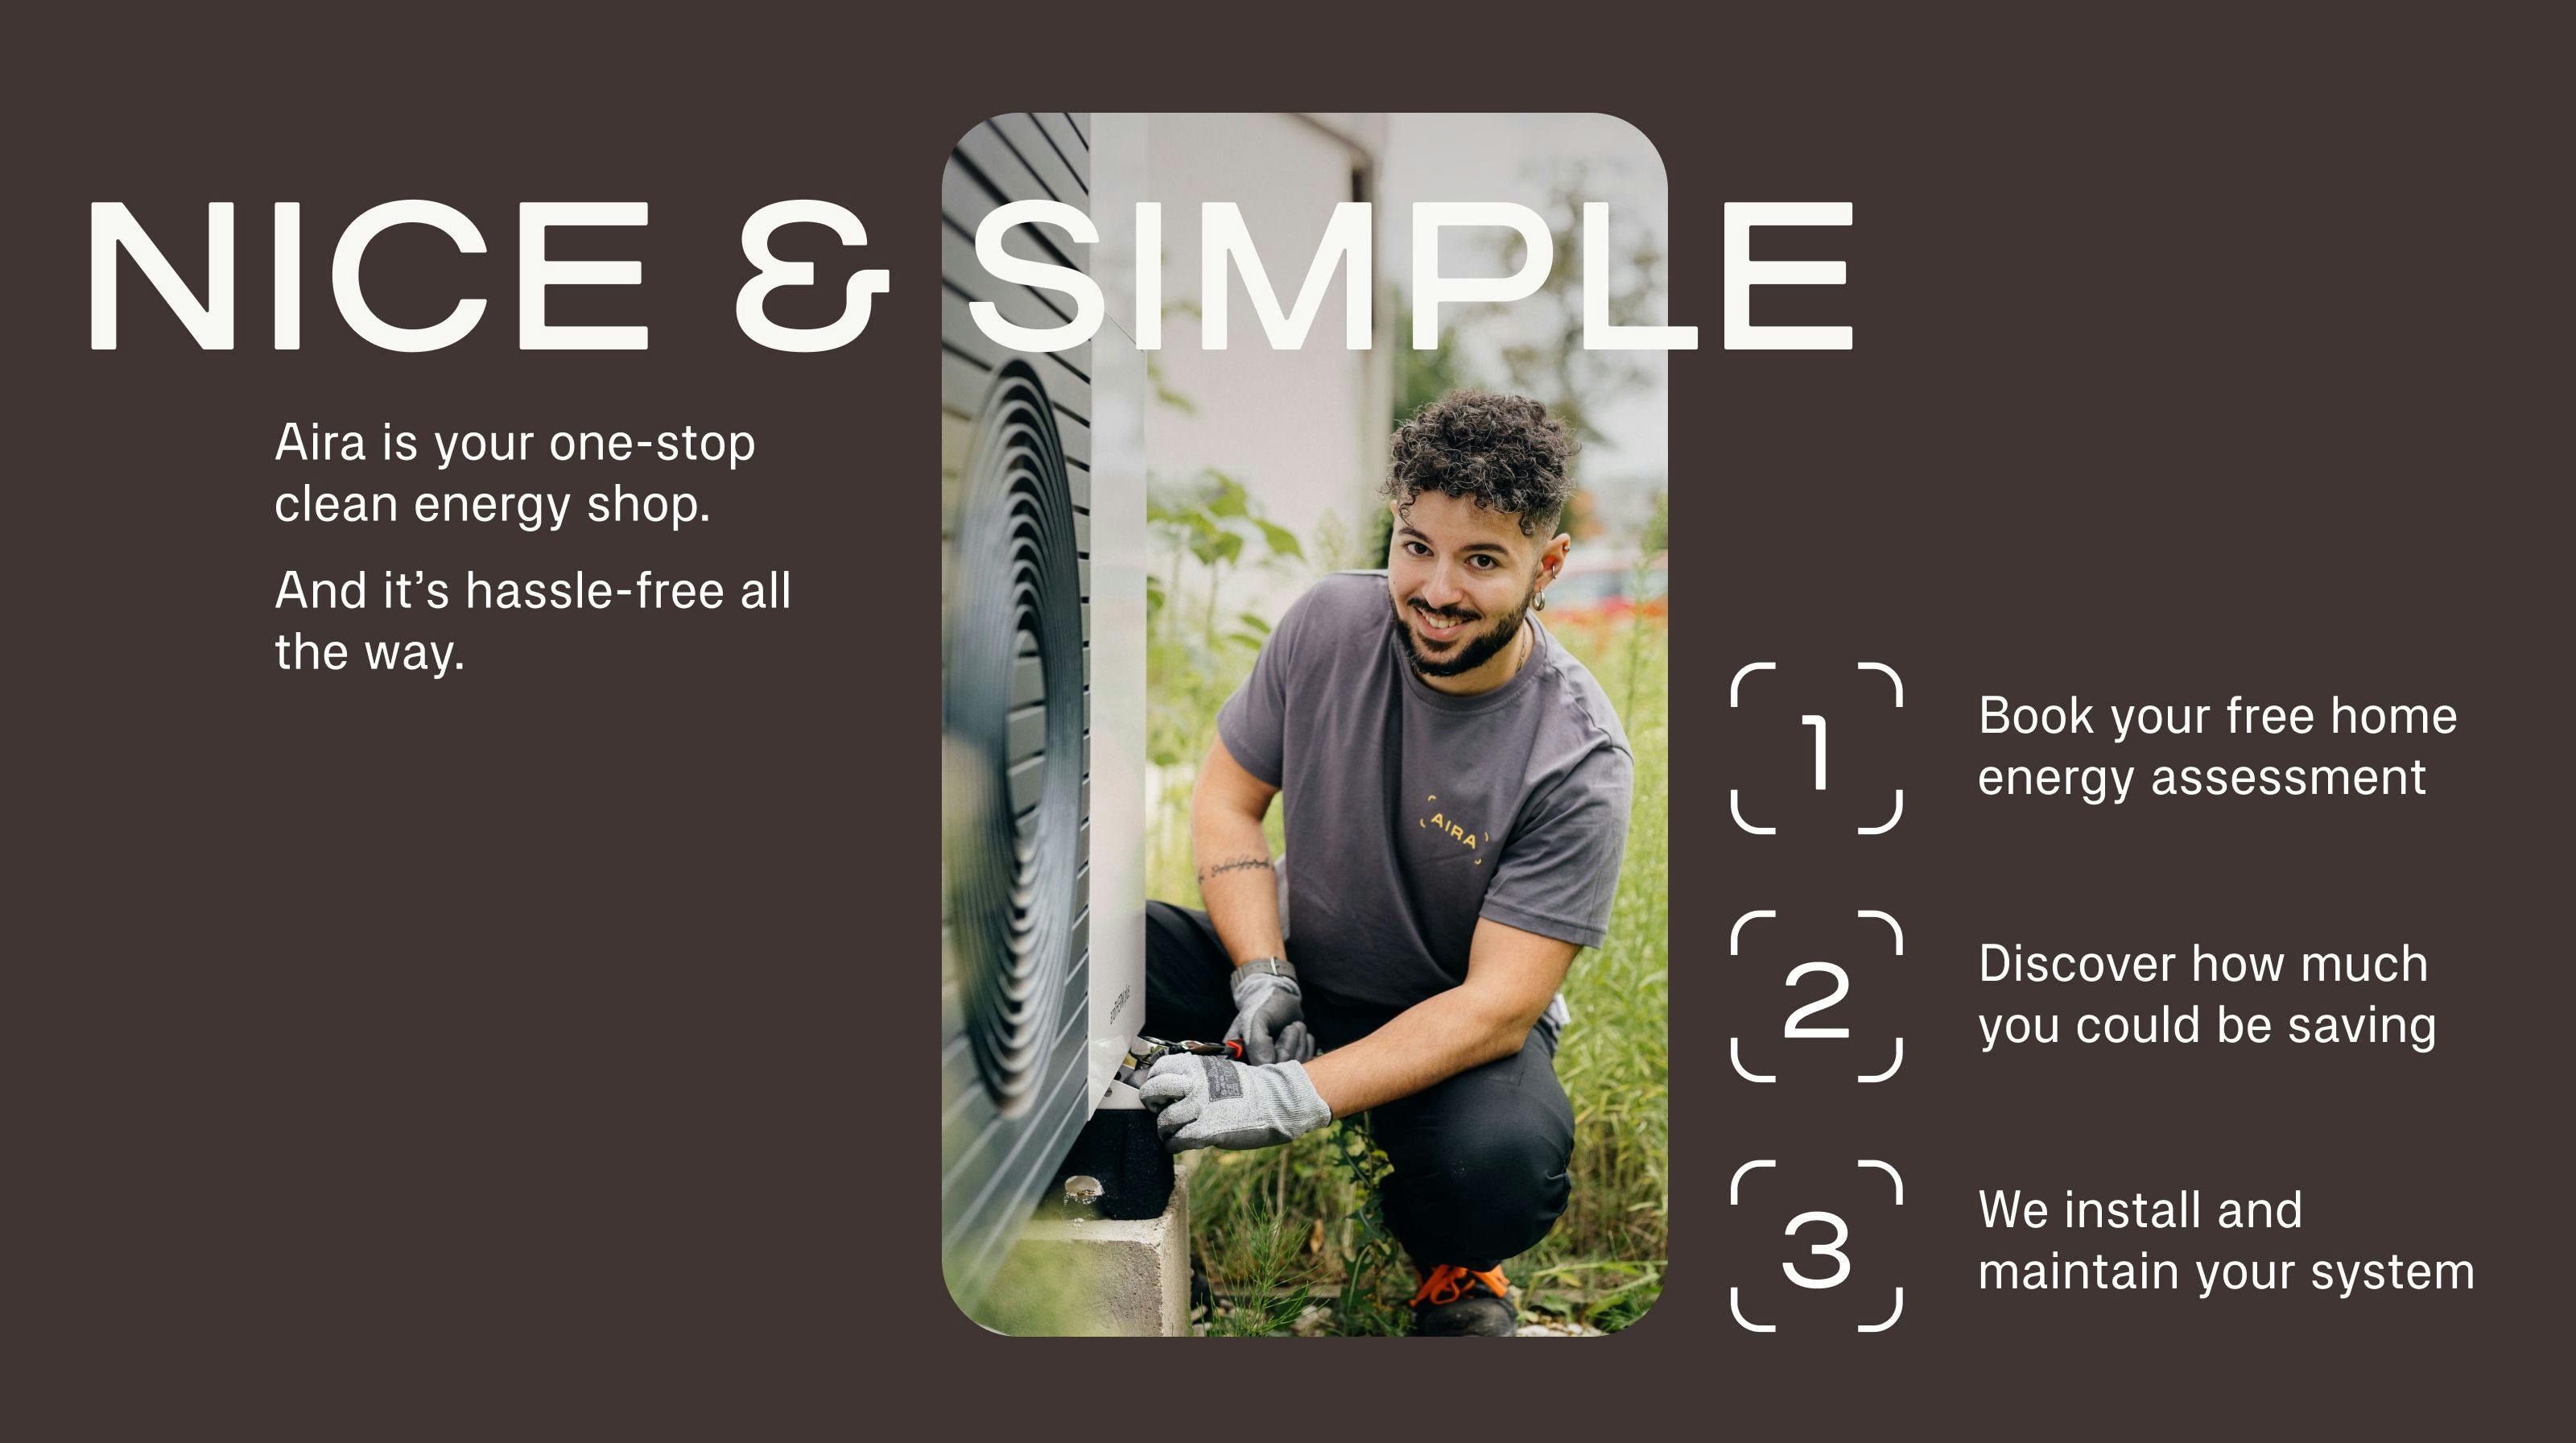 Aira's simple 3 step approach to getting a heat pump. Step 1 book a free home energy assessment, step 2 Aira tells you how much you can save and step 3 Aira installs and maintains your heat pump